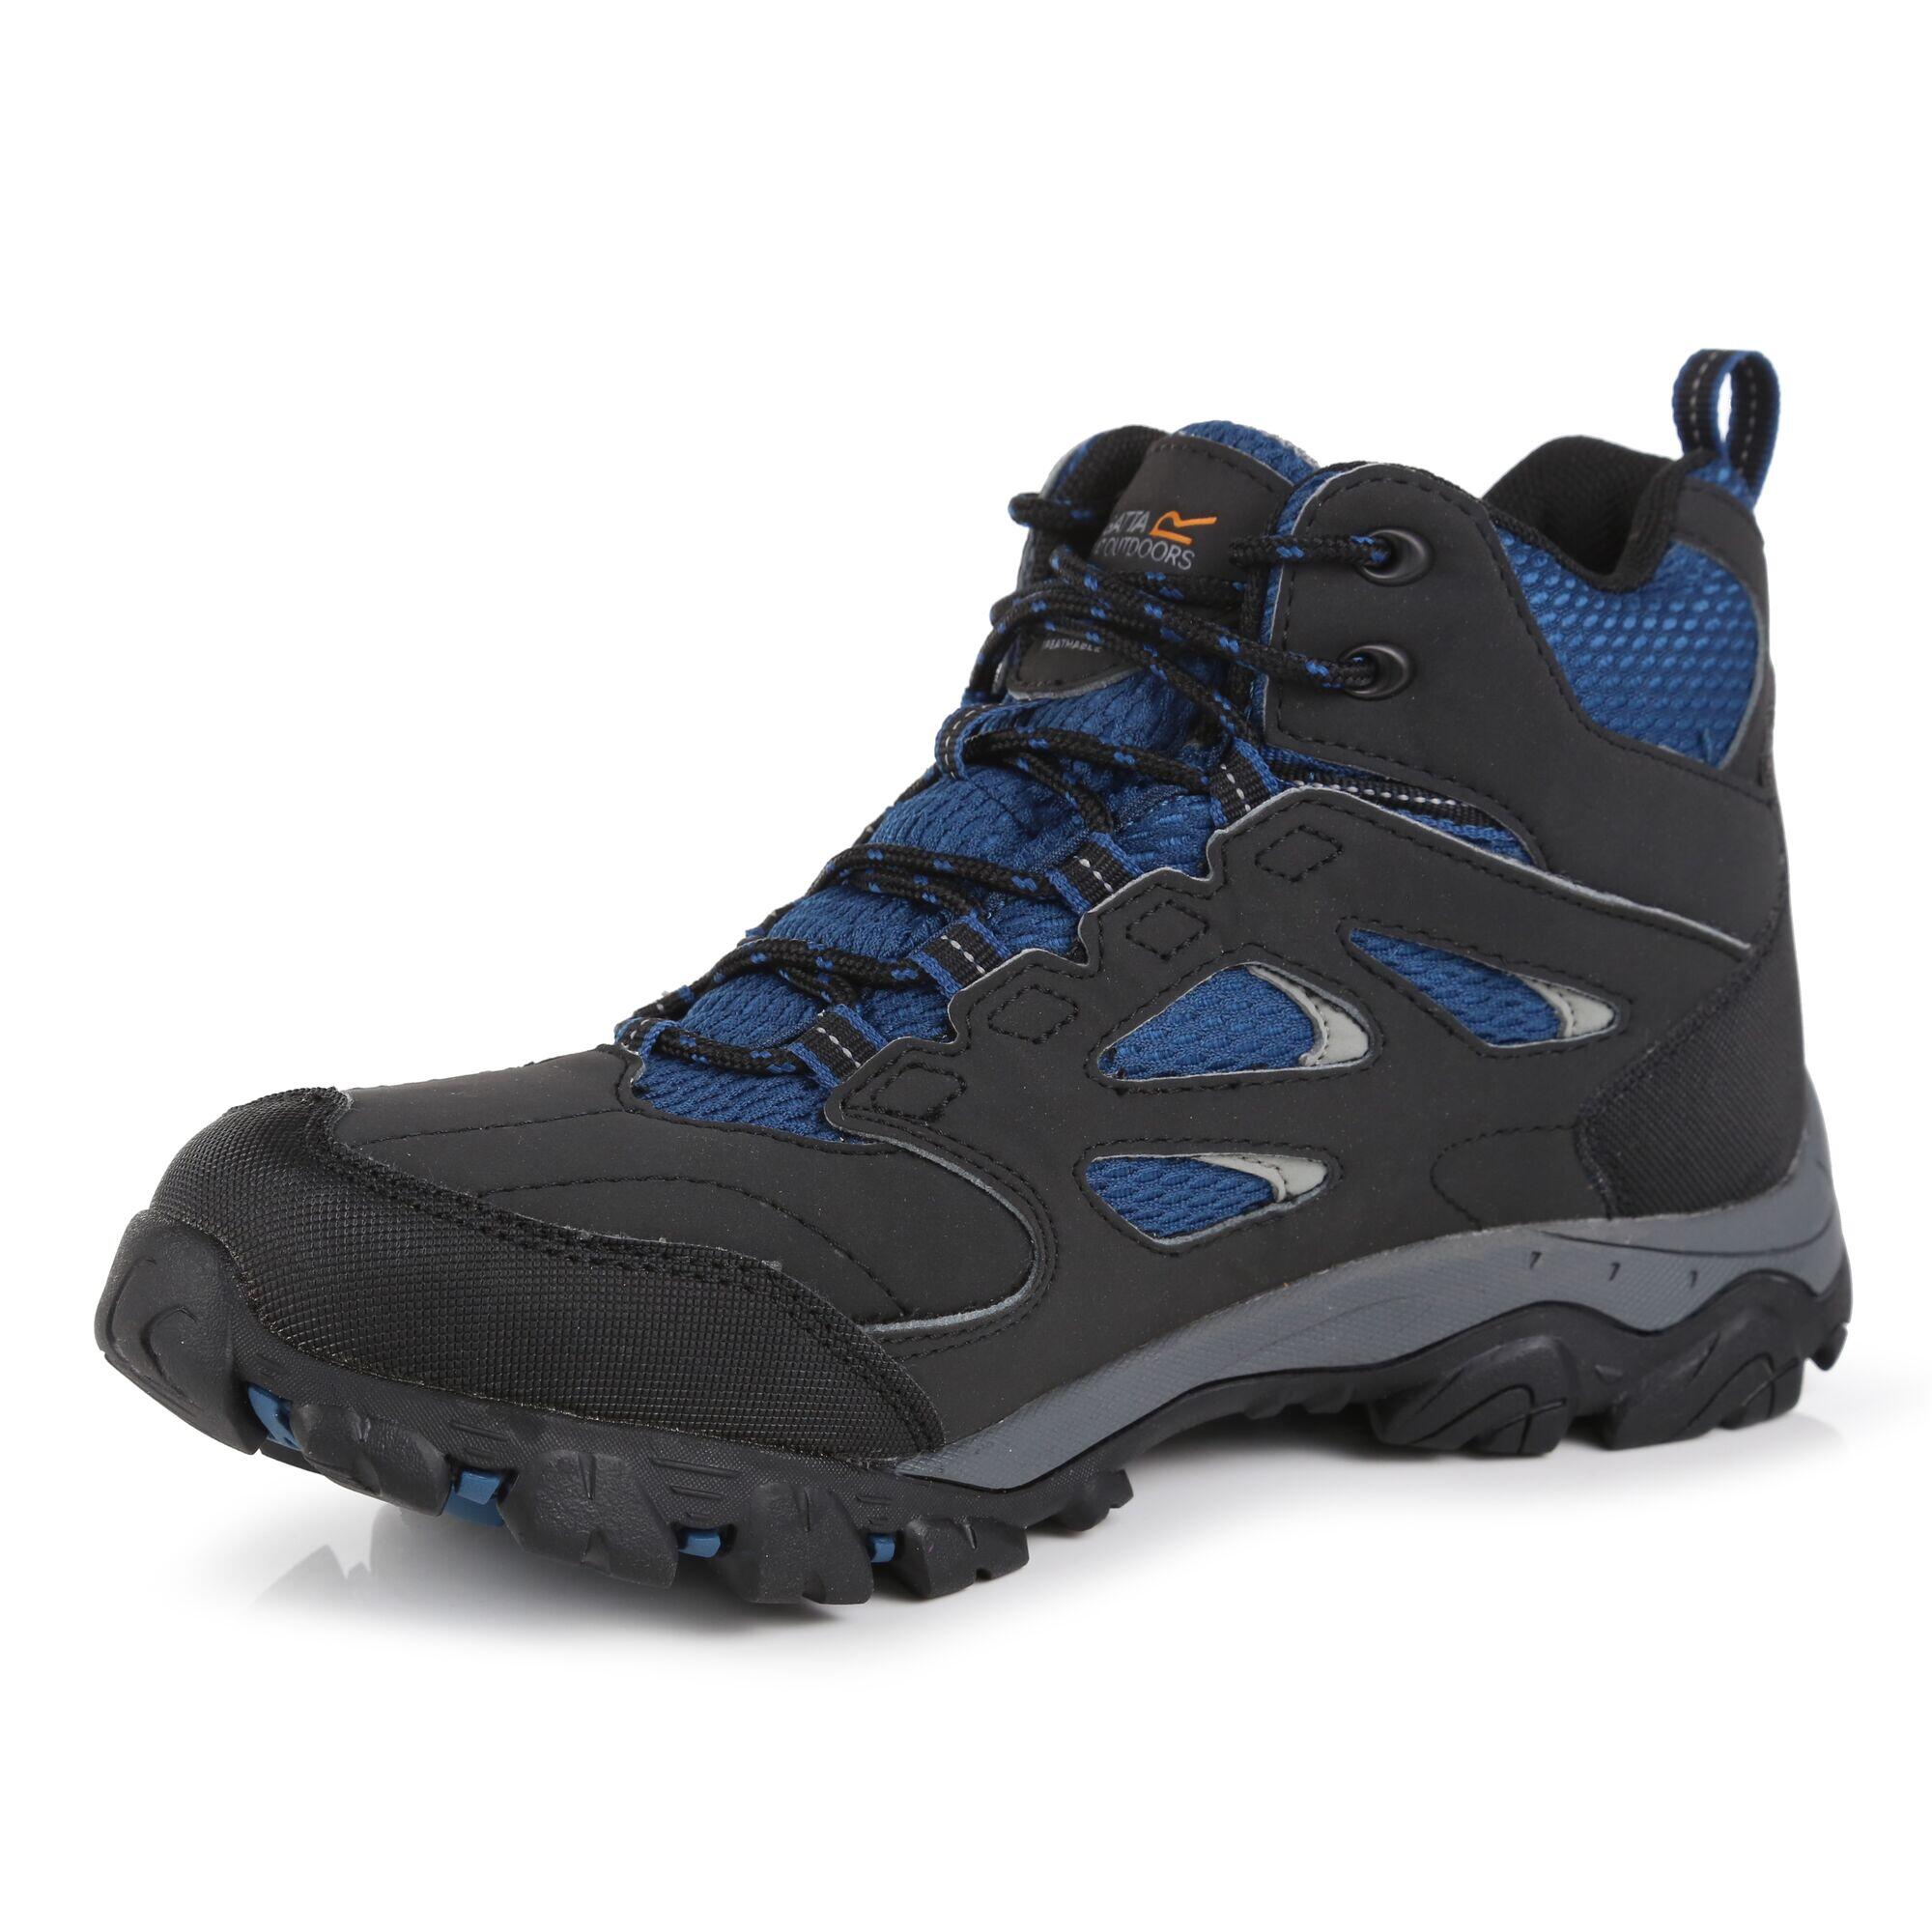 Lady Holcombe IEP Mid Women's Hiking Boots - Ash Grey / Blue 4/5